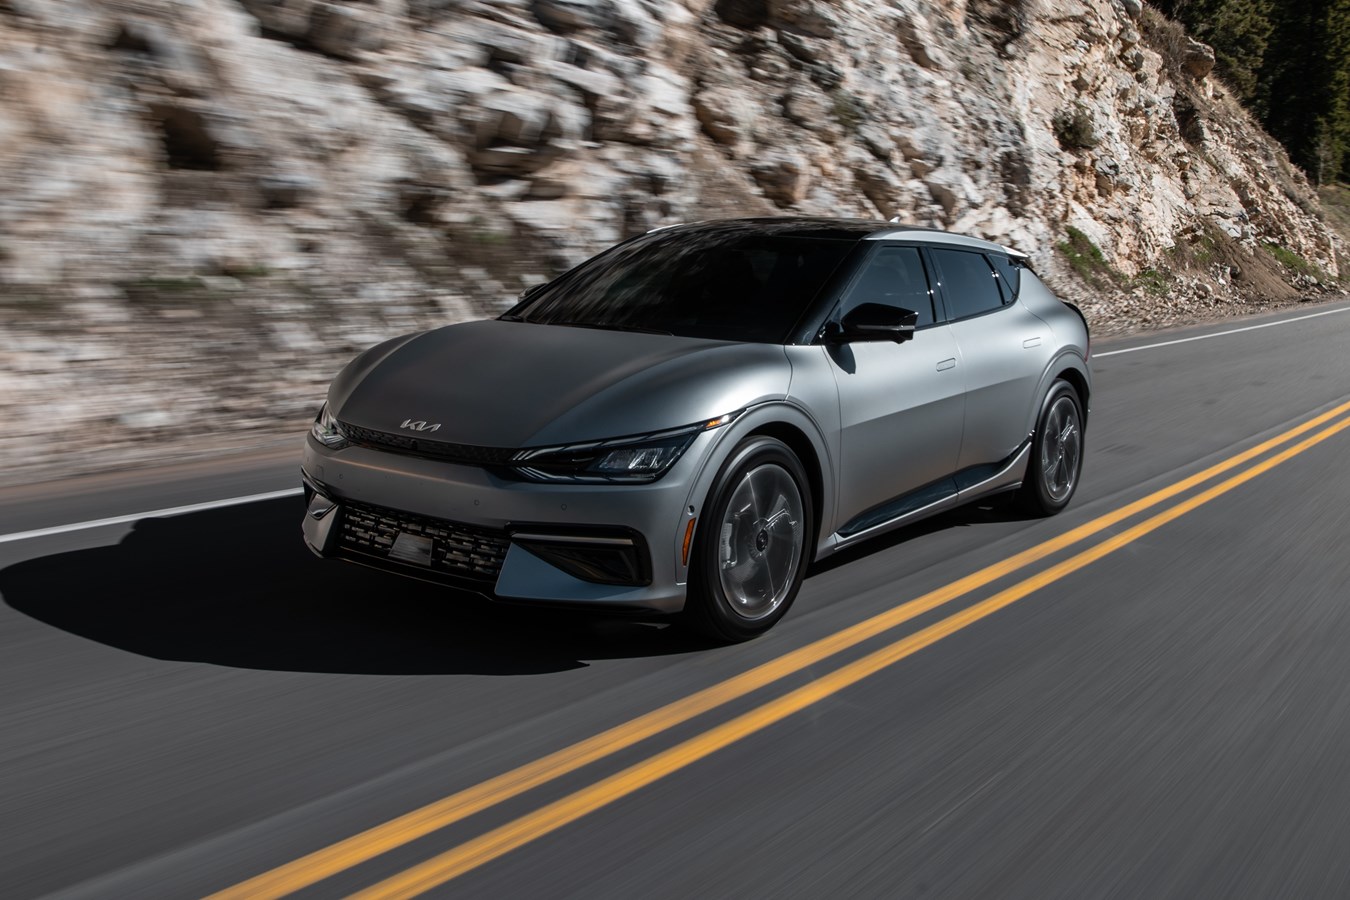 KIA's first-ever fully-electric vehicle, the EV6, is coming in quarter one of 2022. Order yours today here at Savage KIA in Reading, PA.